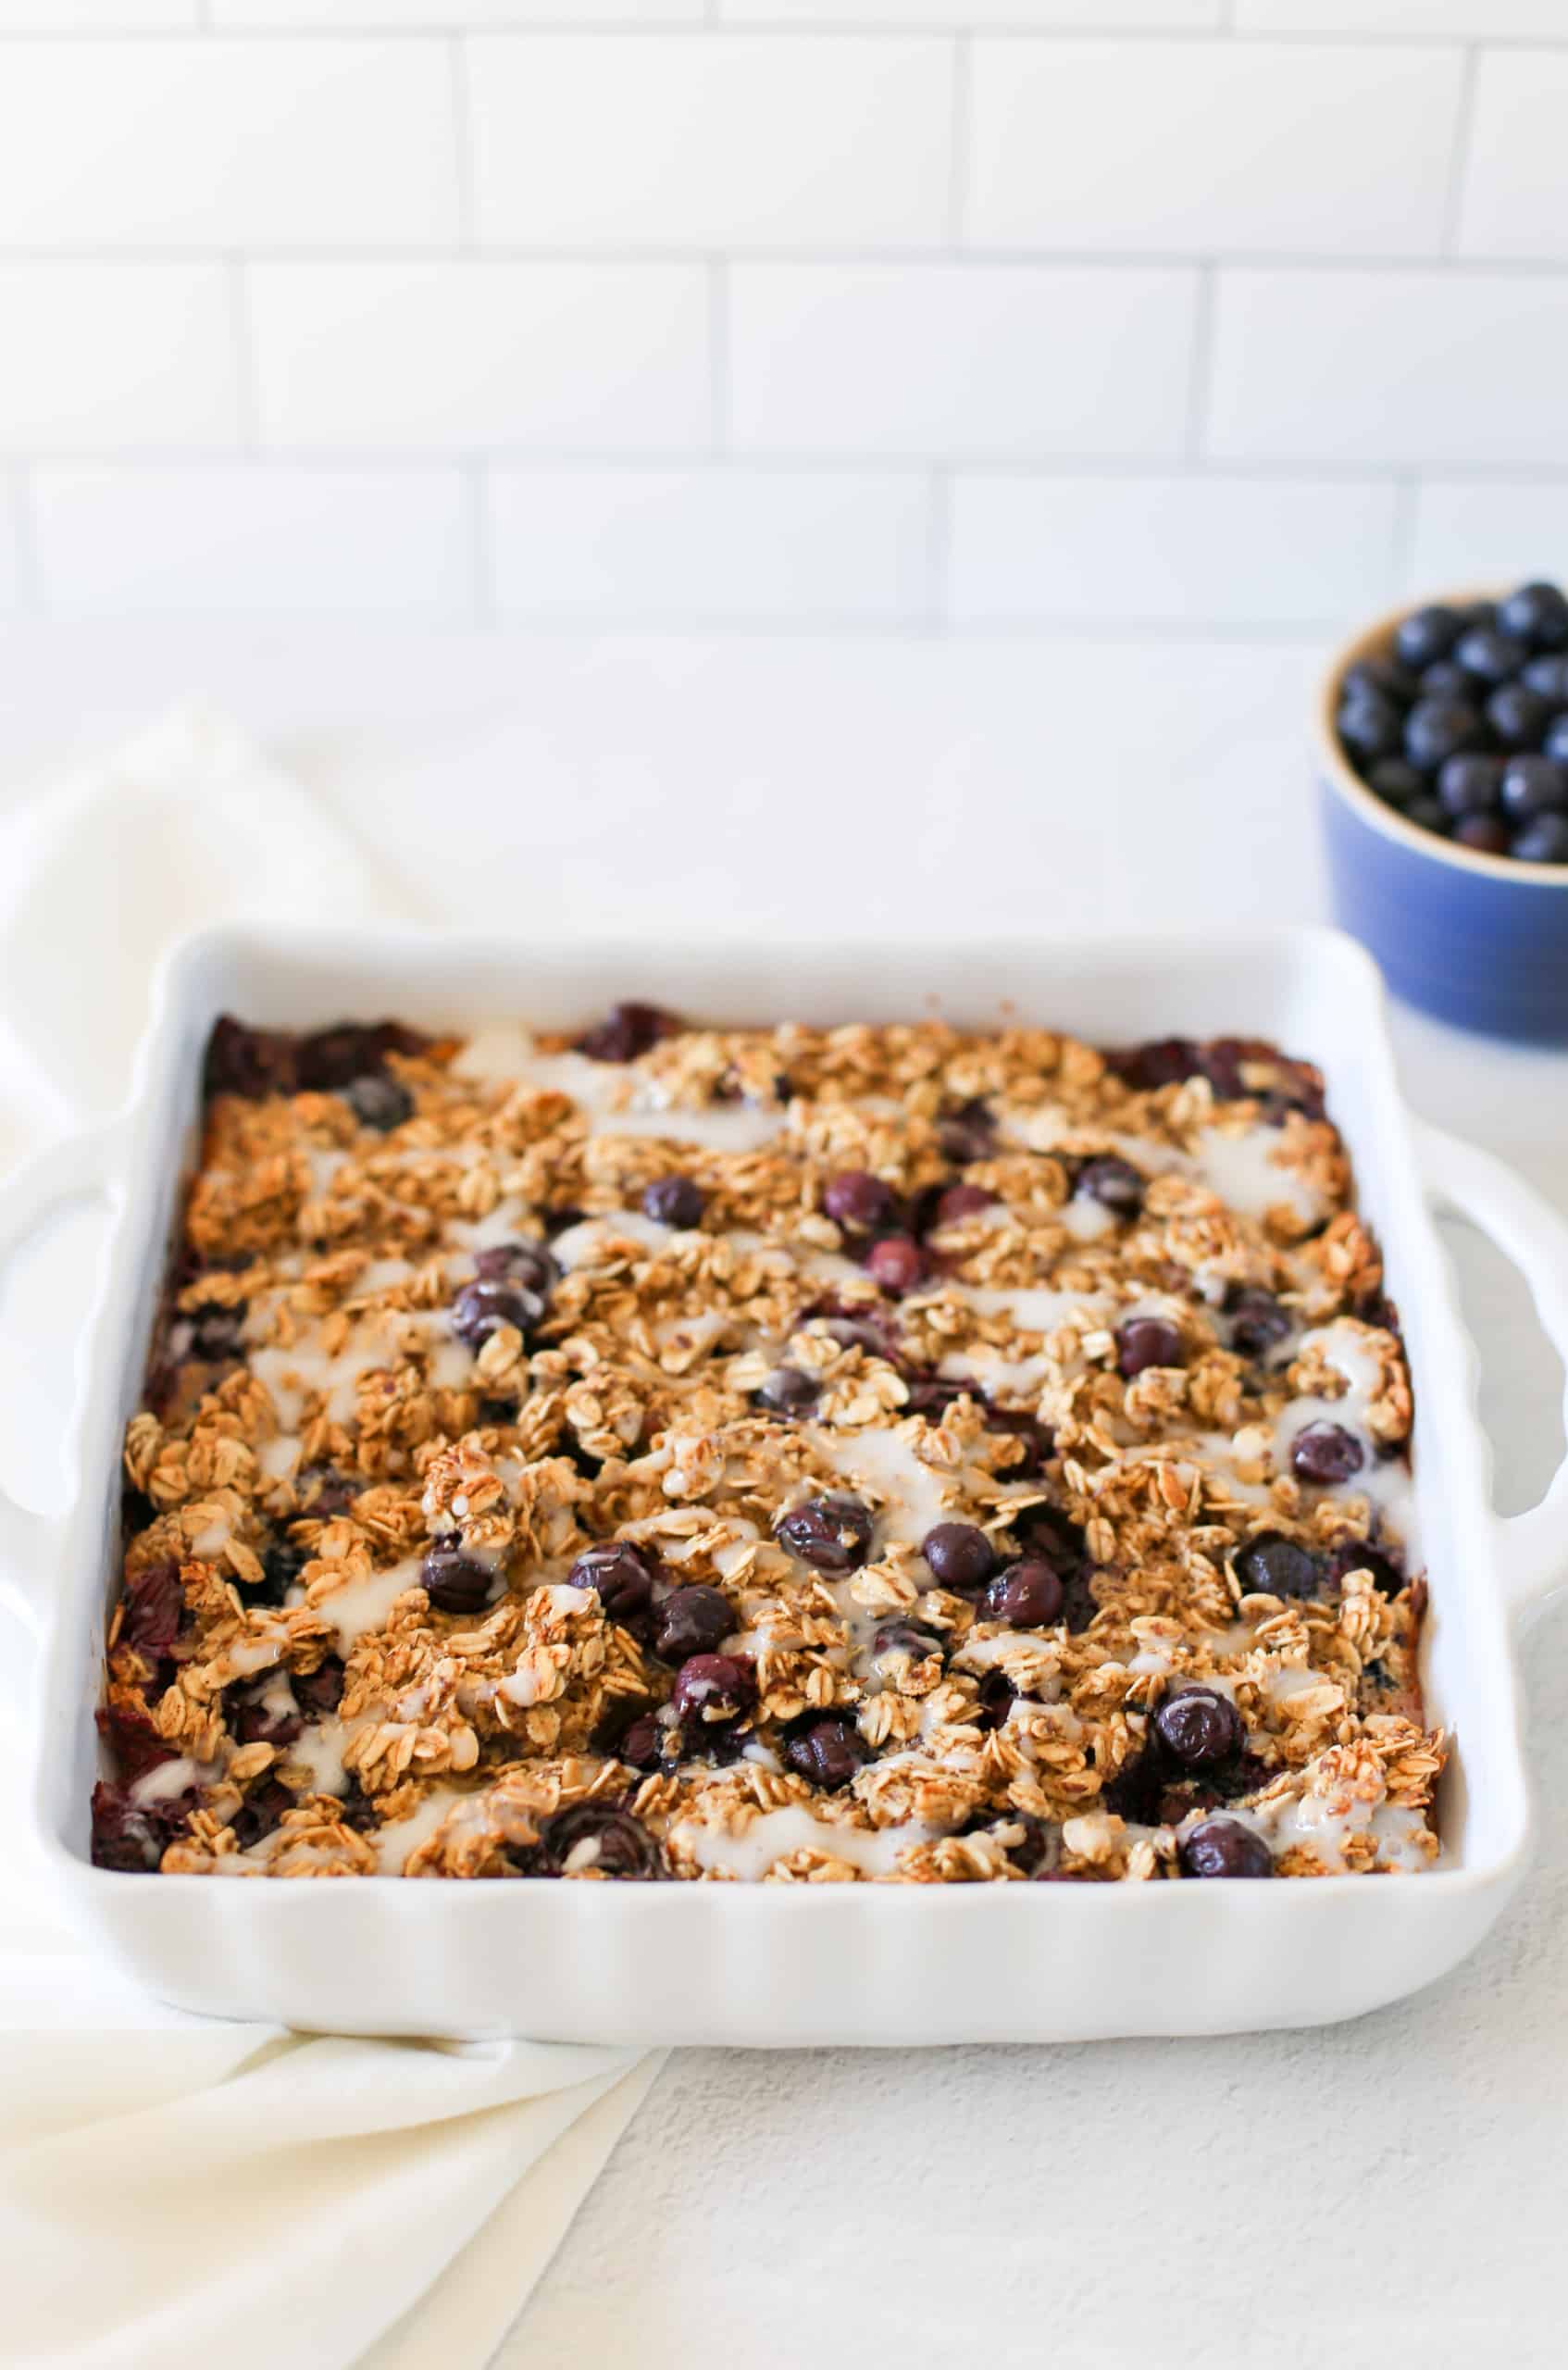 Blueberry baked oatmeal in a white baking dish ready to be served.